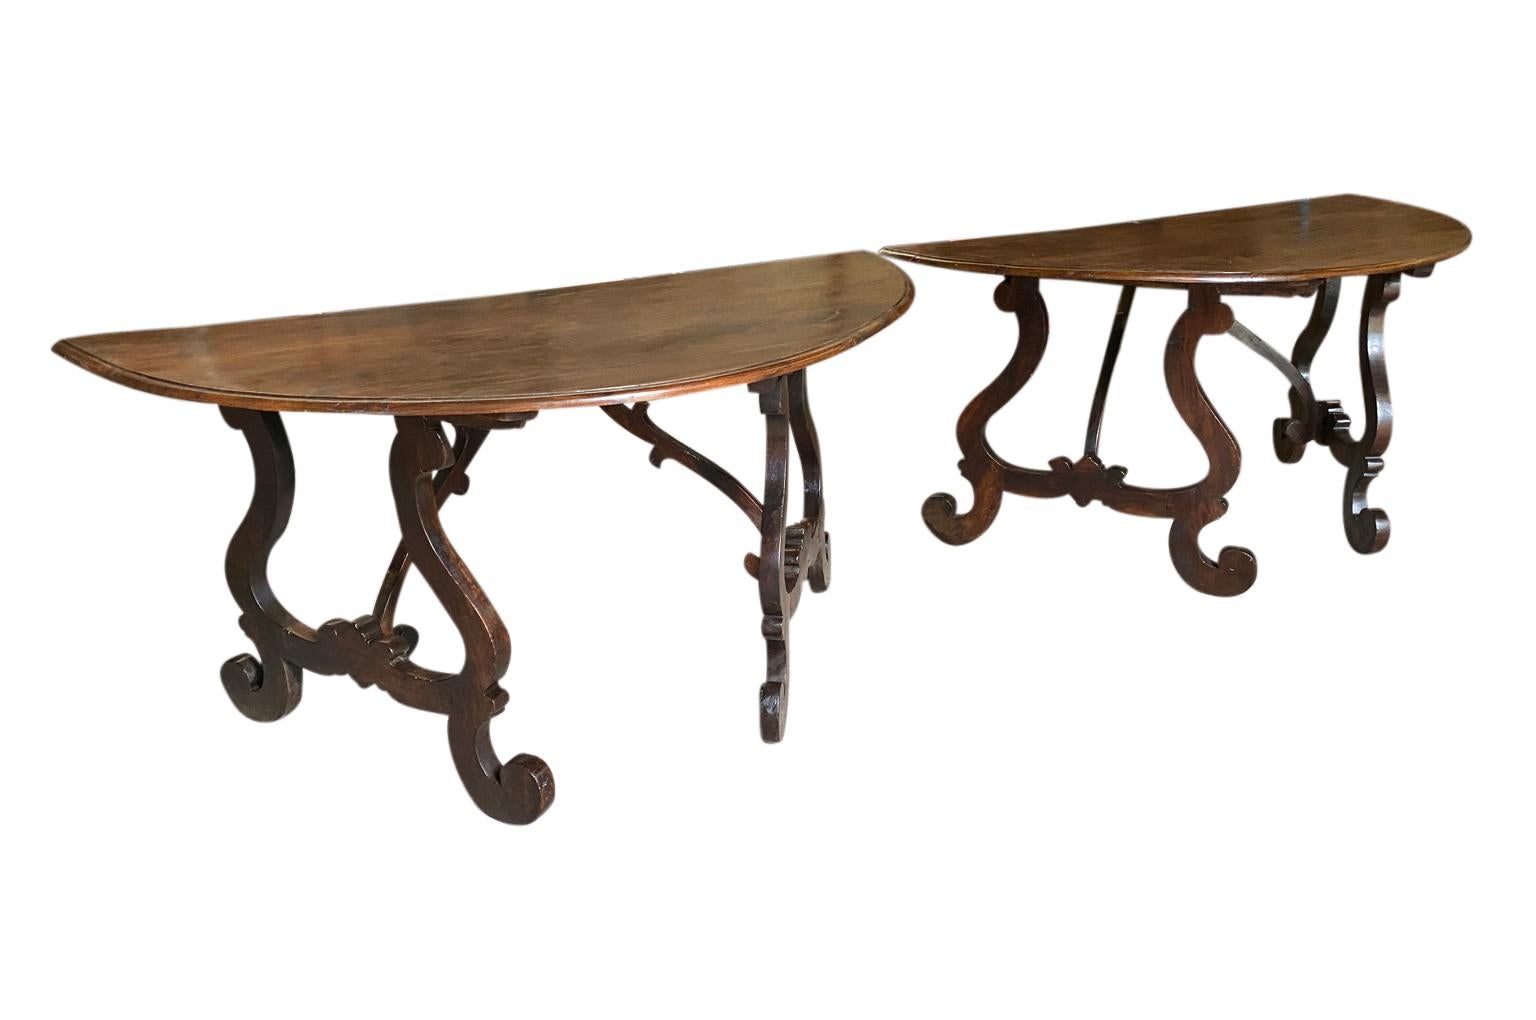 An exceptional and rare pair of Northern Italian grand scale Demi Lune console tables expertly crafted from stunning walnut with classical lyre shaped legs. Excellent patina.